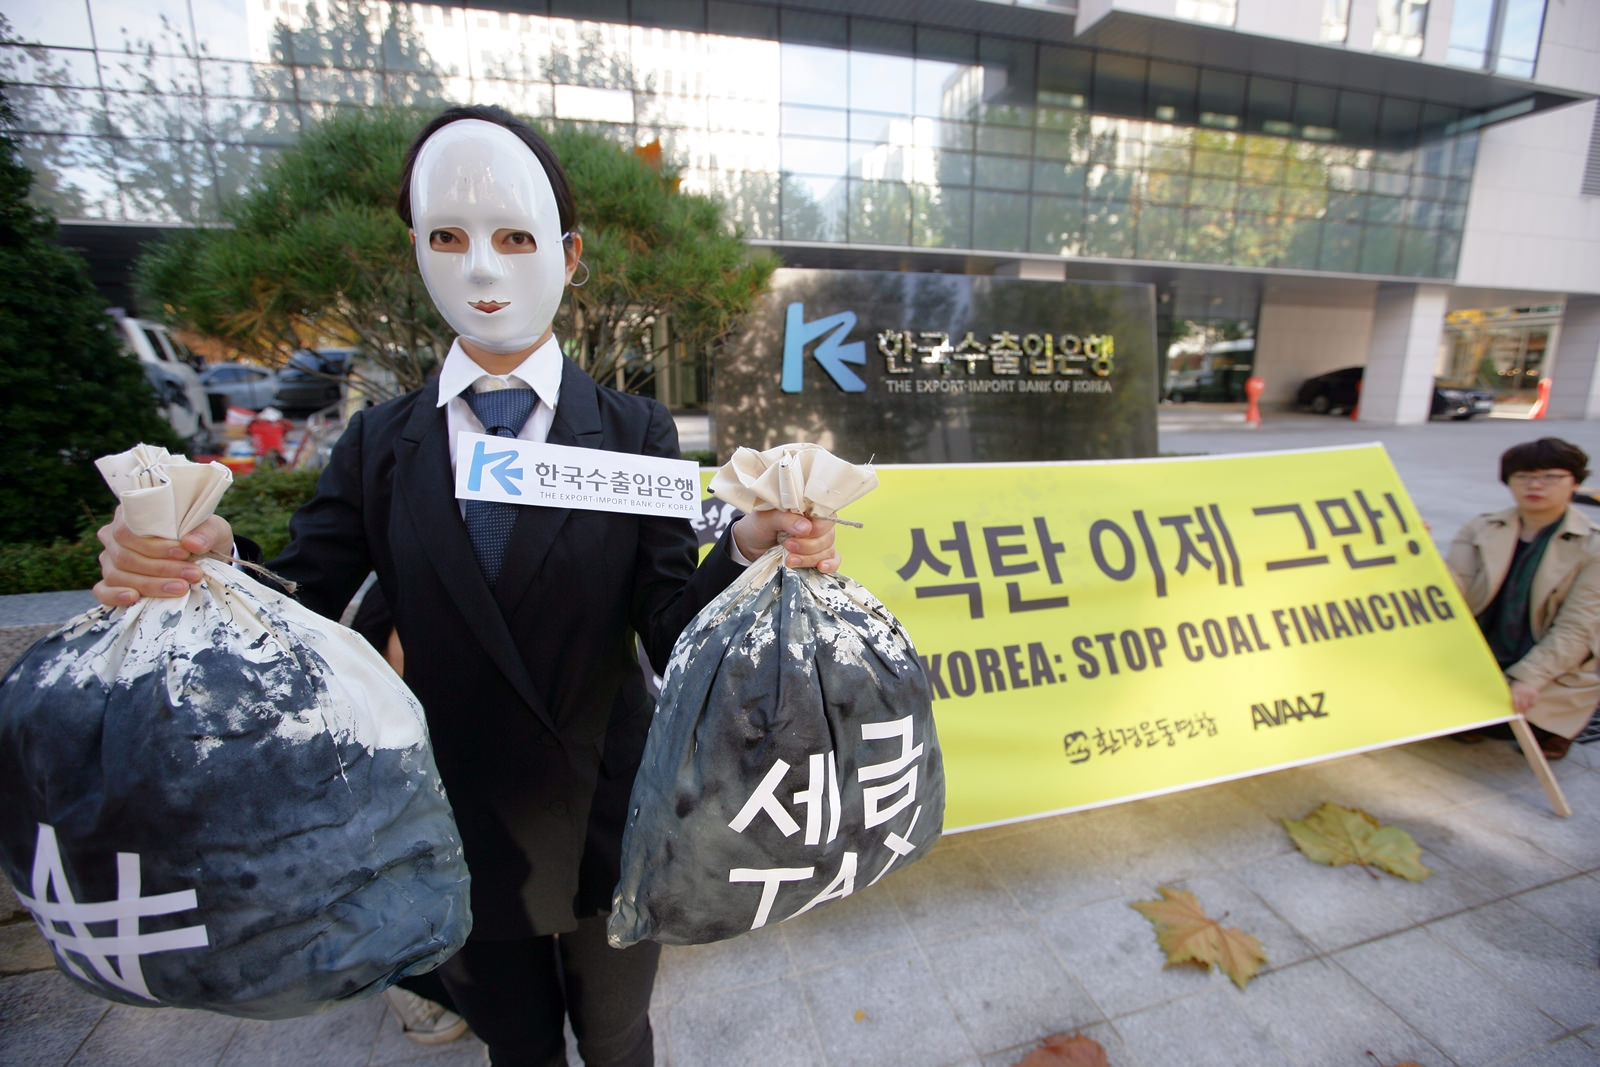 Activists call on the Korea Export-Import Bank to stop funding coal projects.